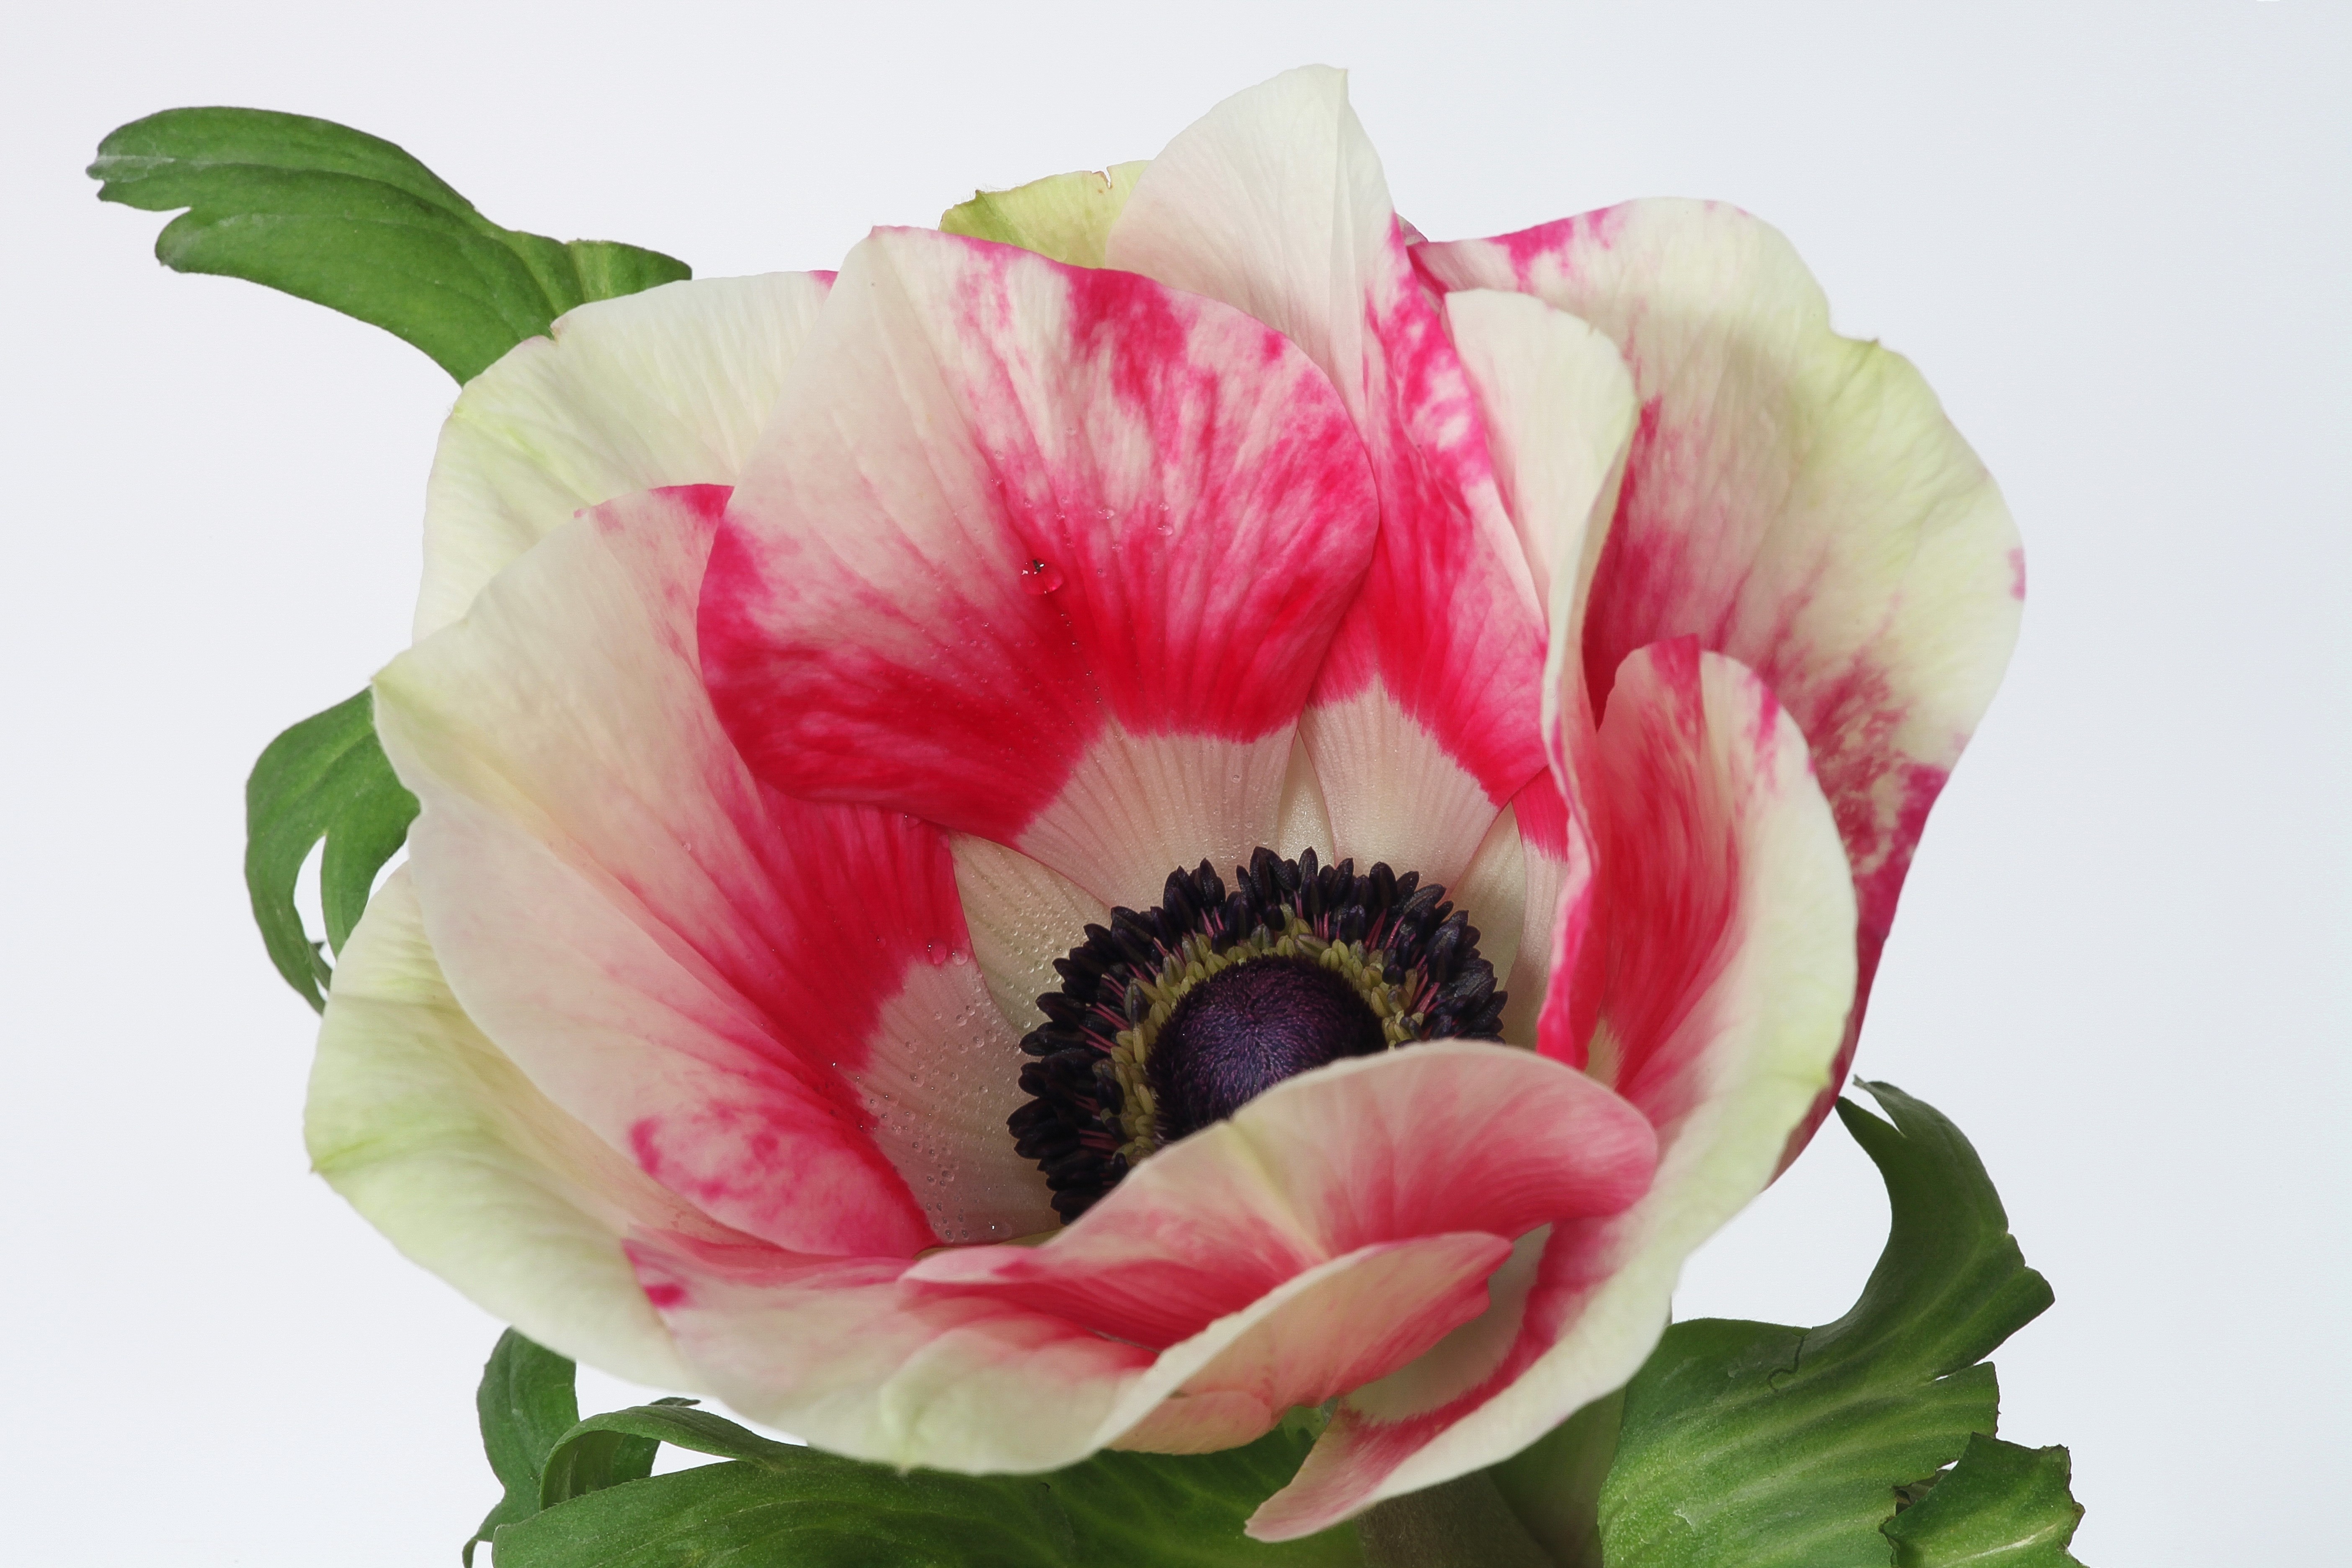 earth, anemone, close up, flower, flowers